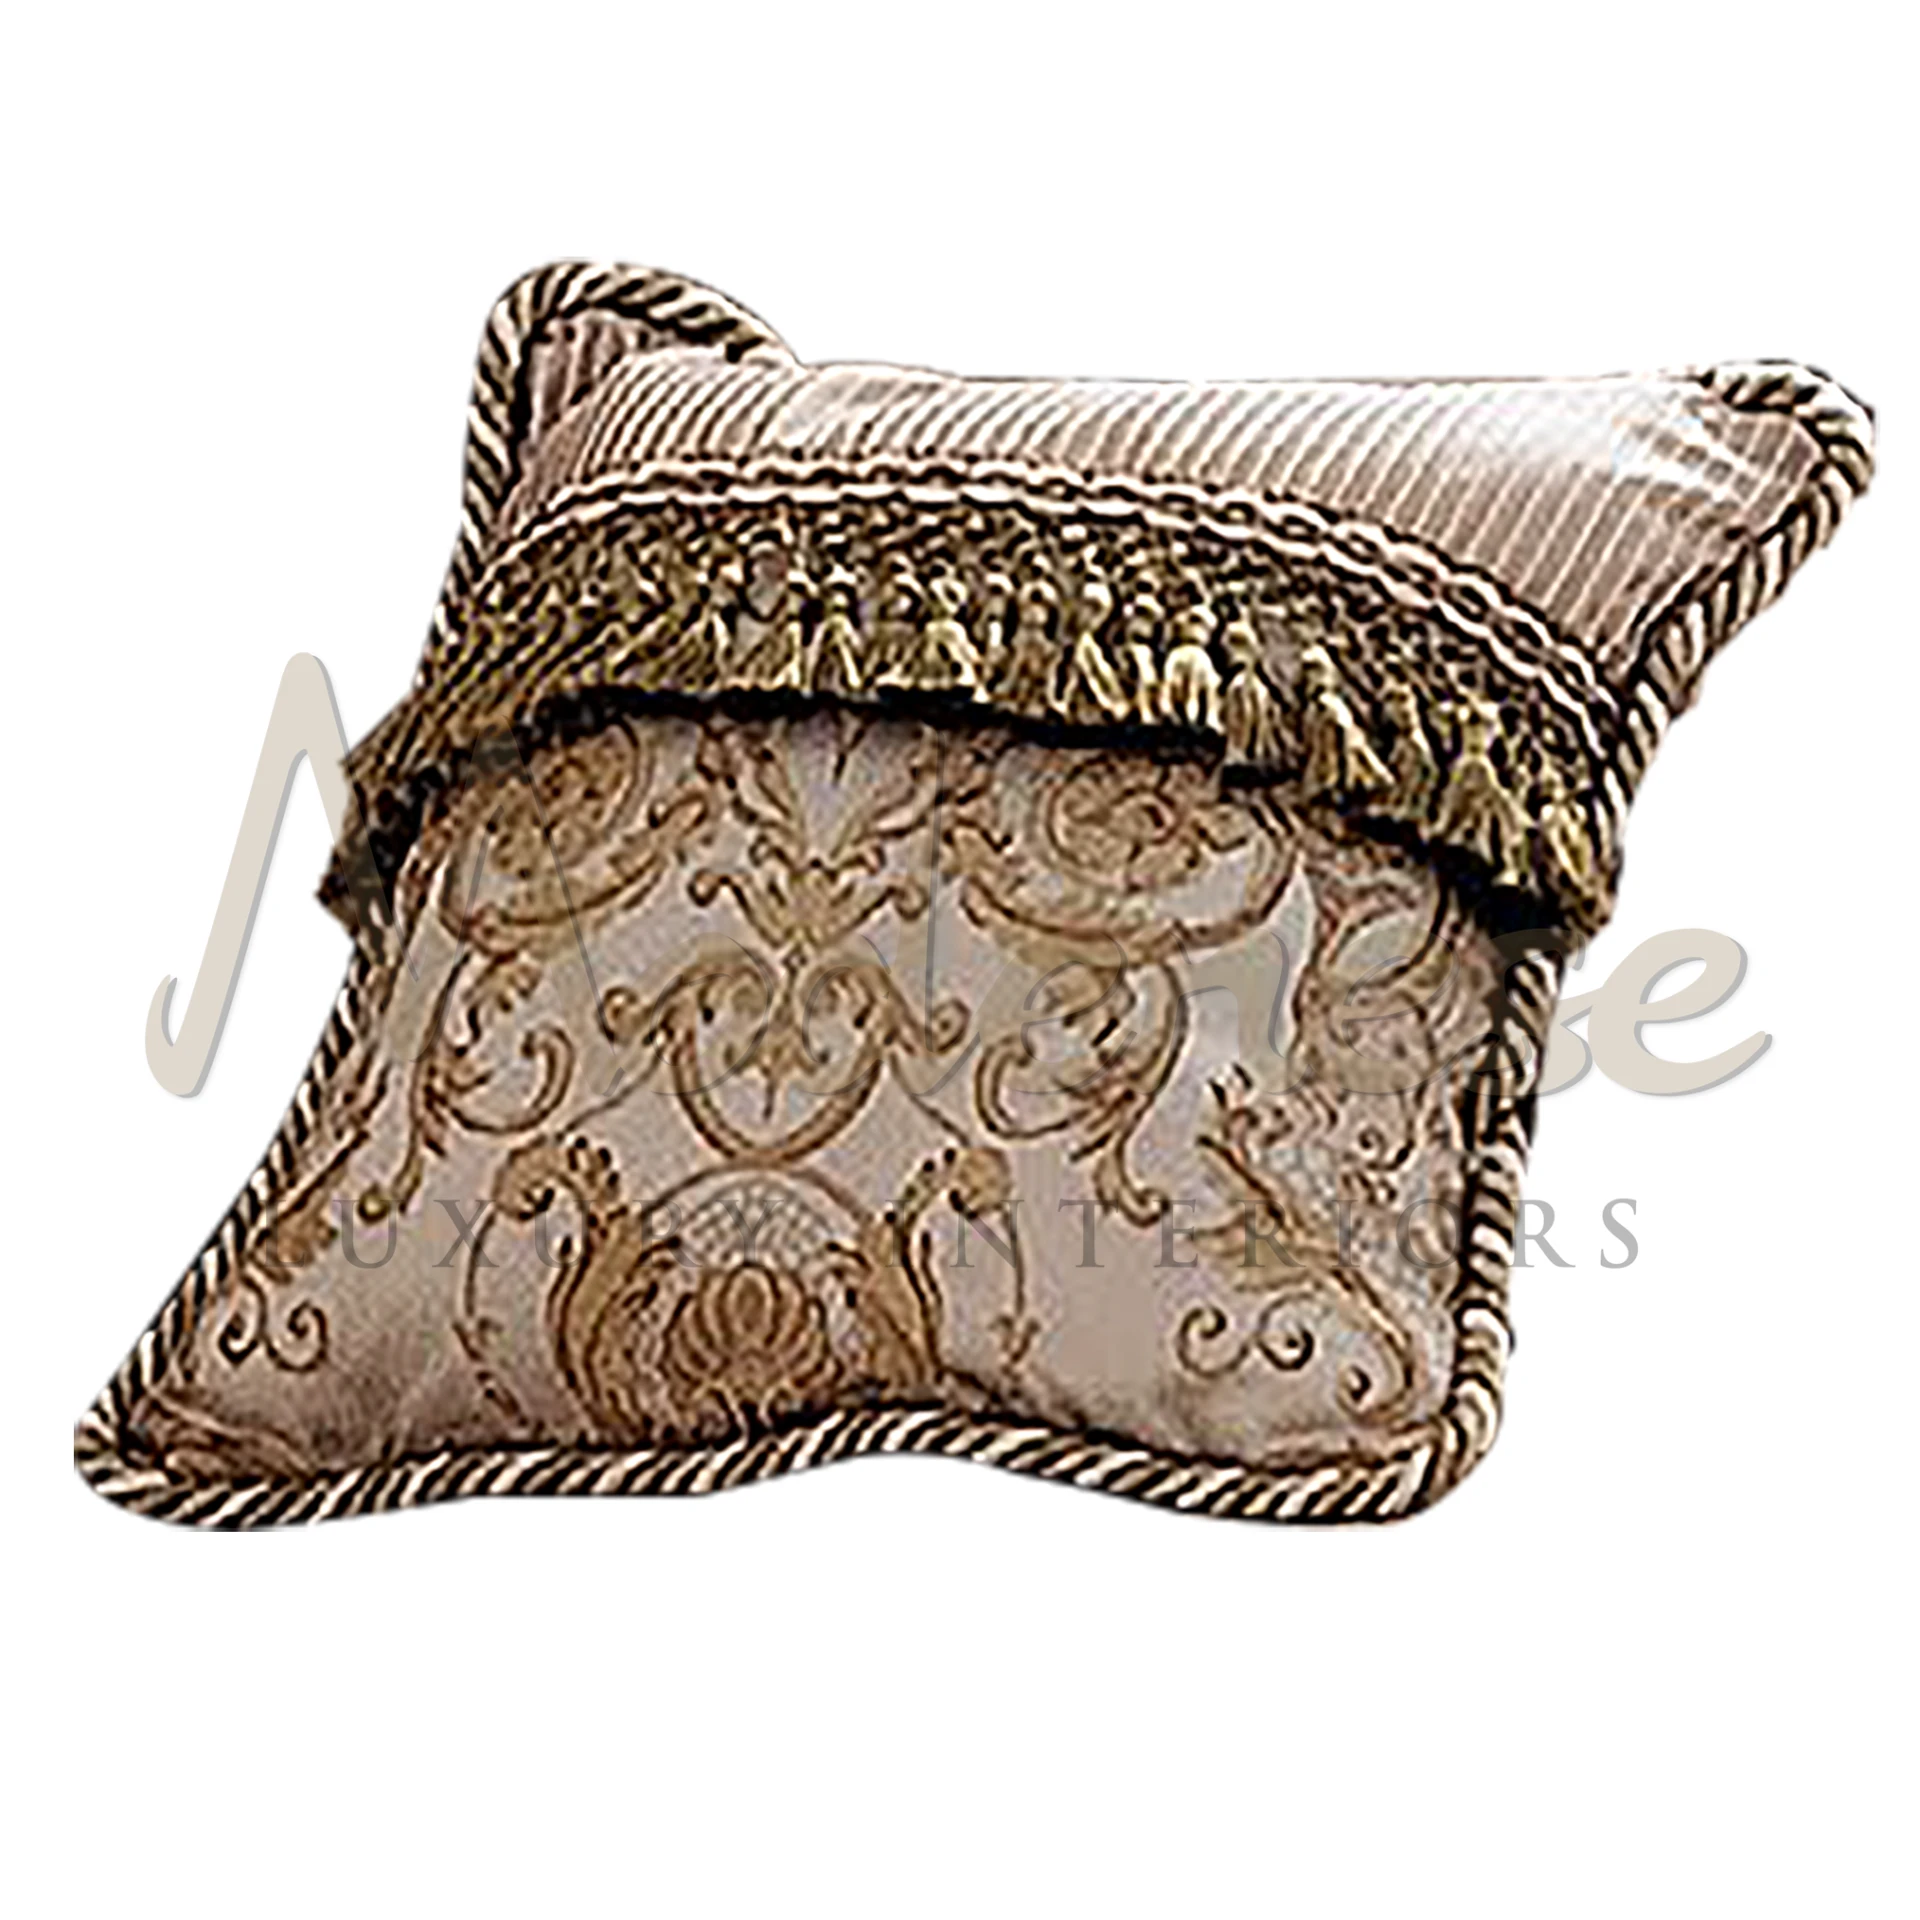 Traditional Brown Pillow with clean lines and classic patterns, reflecting refined Italian elegance and luxury textiles.